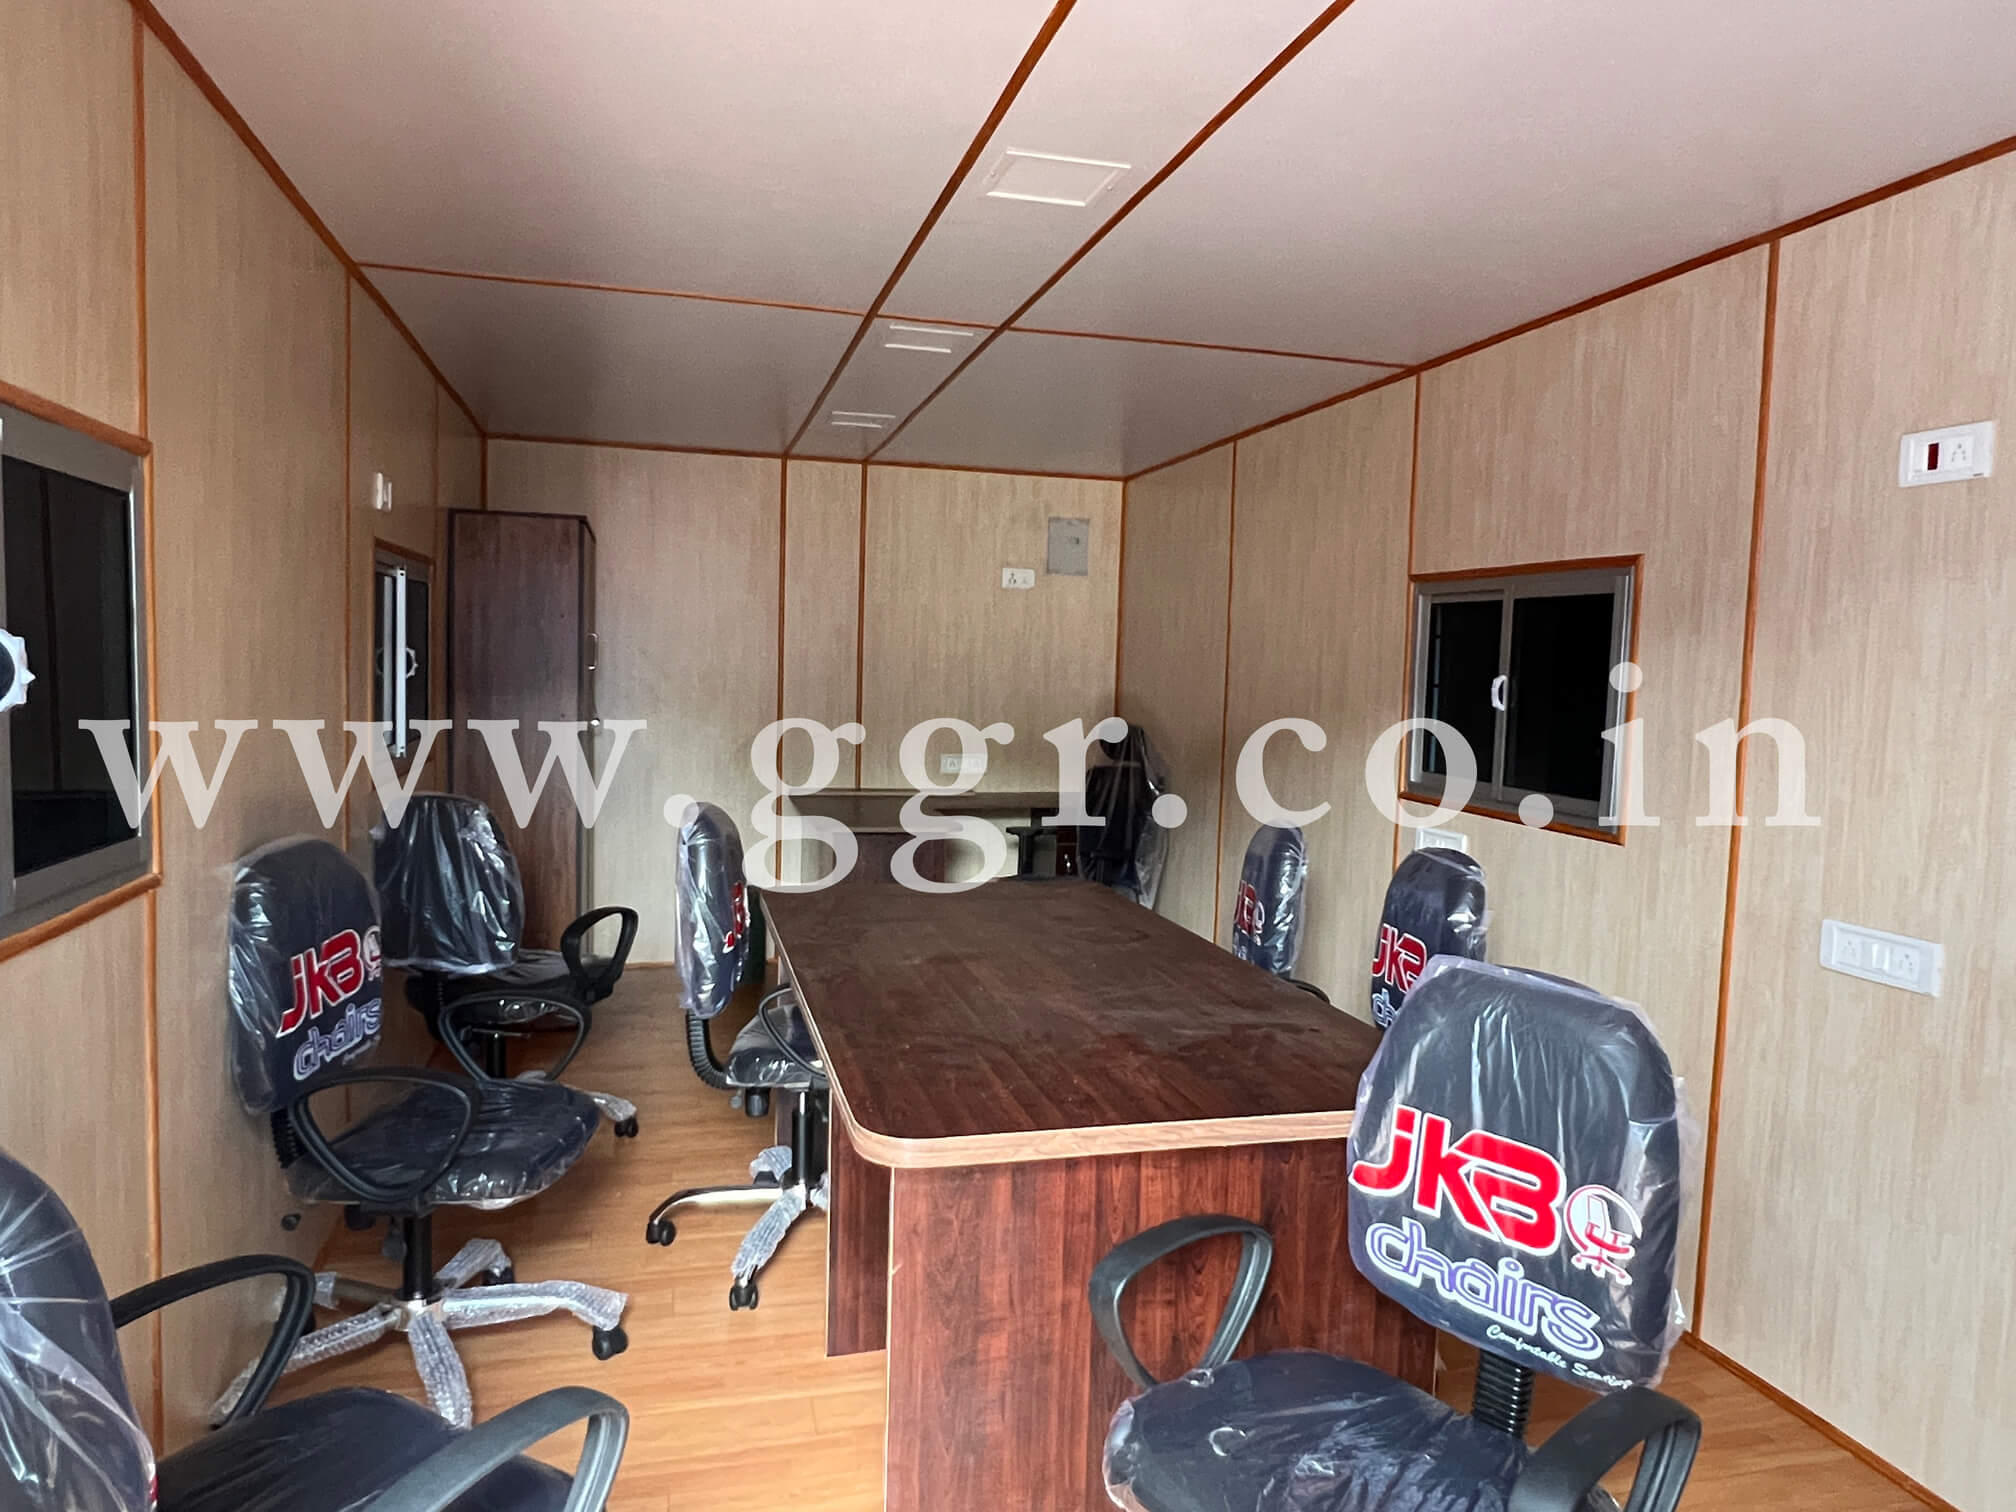 Site Office Cabin in Chennai